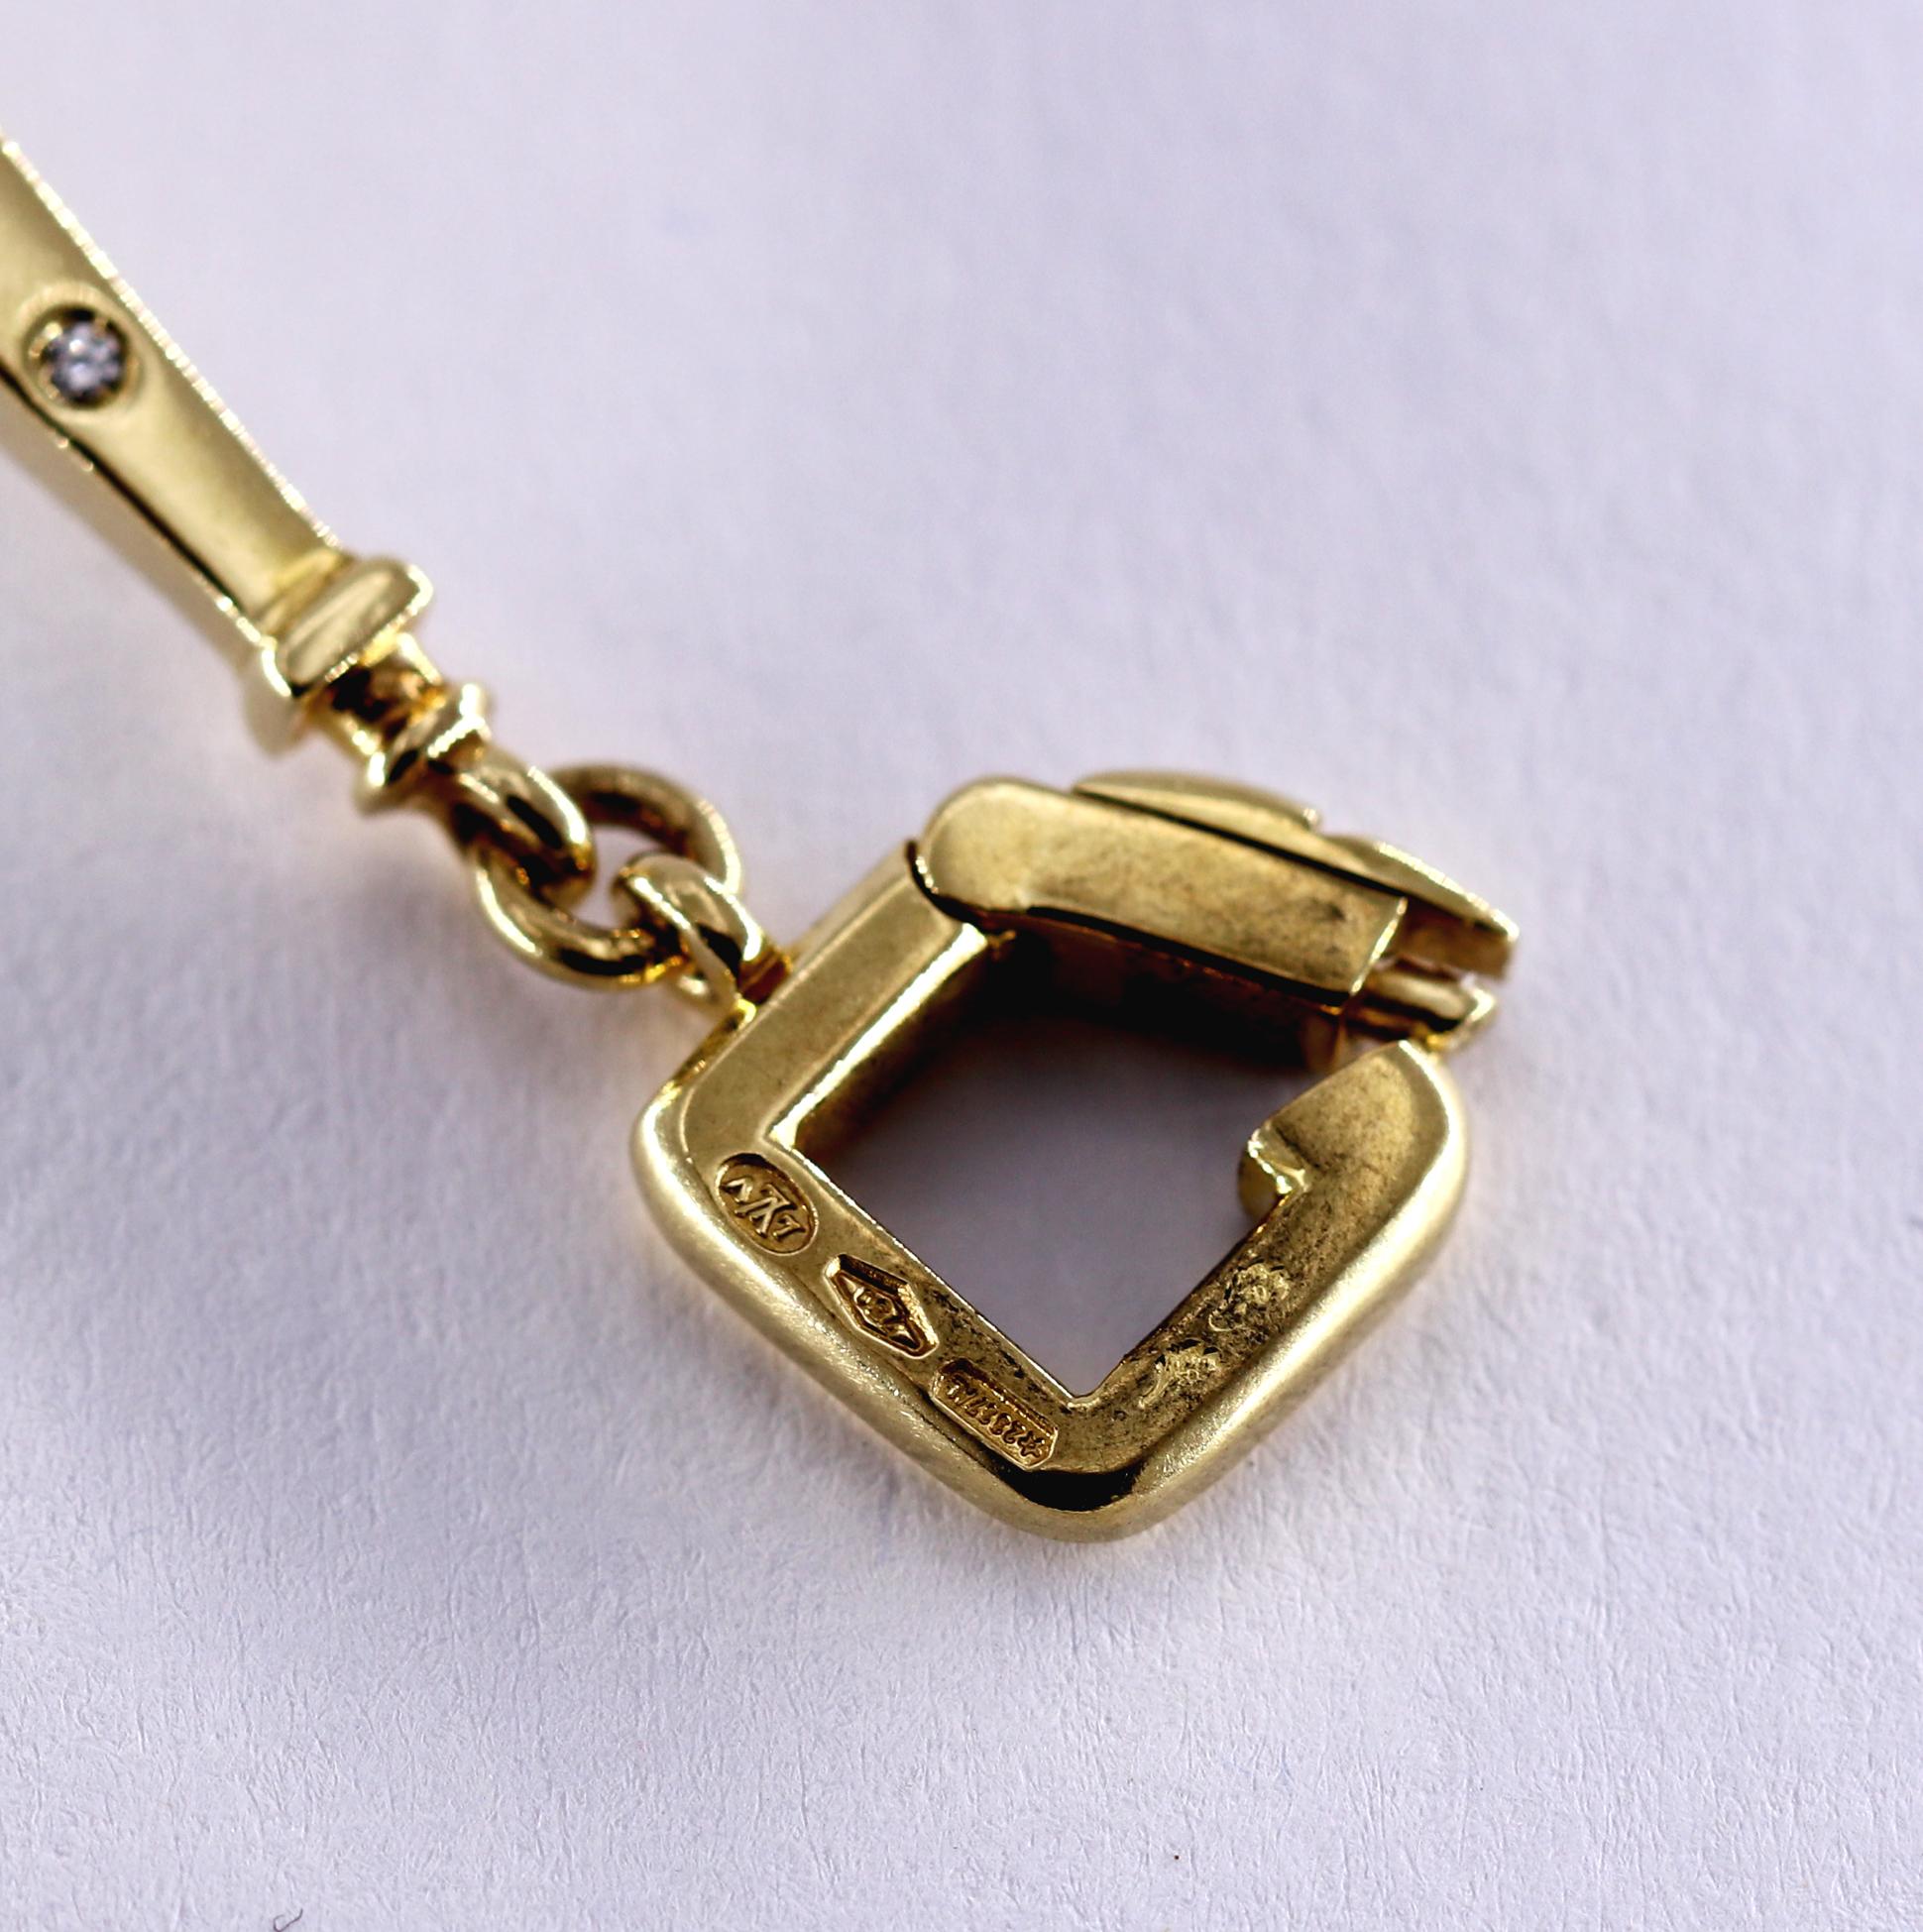 Women's Louis Vuitton Gold Charm Bracelet with Lock and Key Clasp and Eiffel Tower Charm